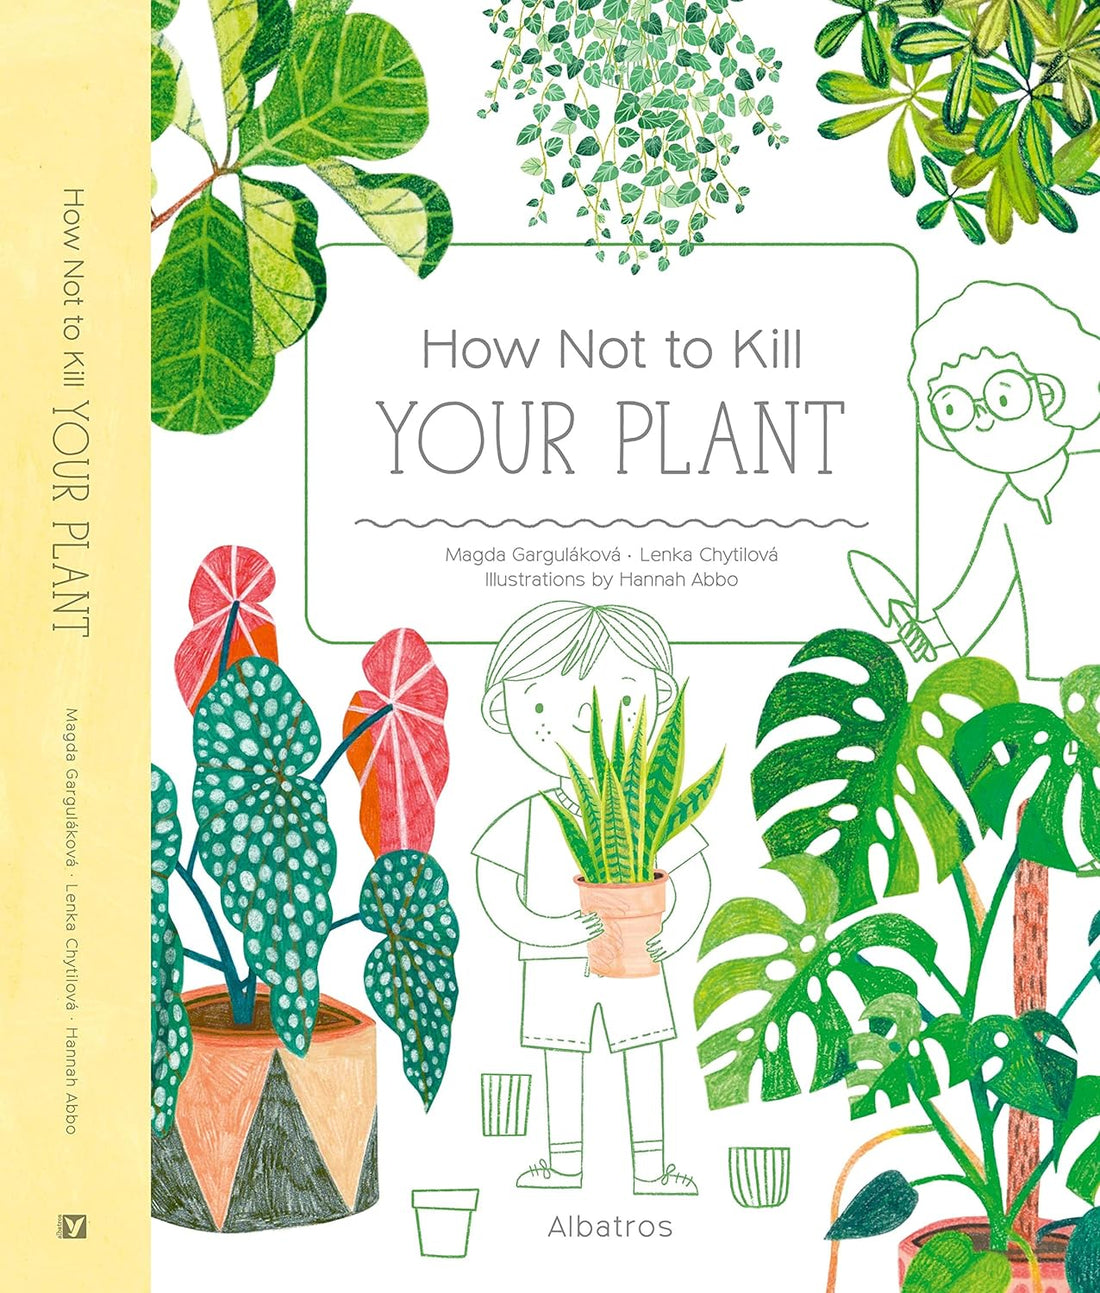 How Not To Kill Your Plant - Parkette.